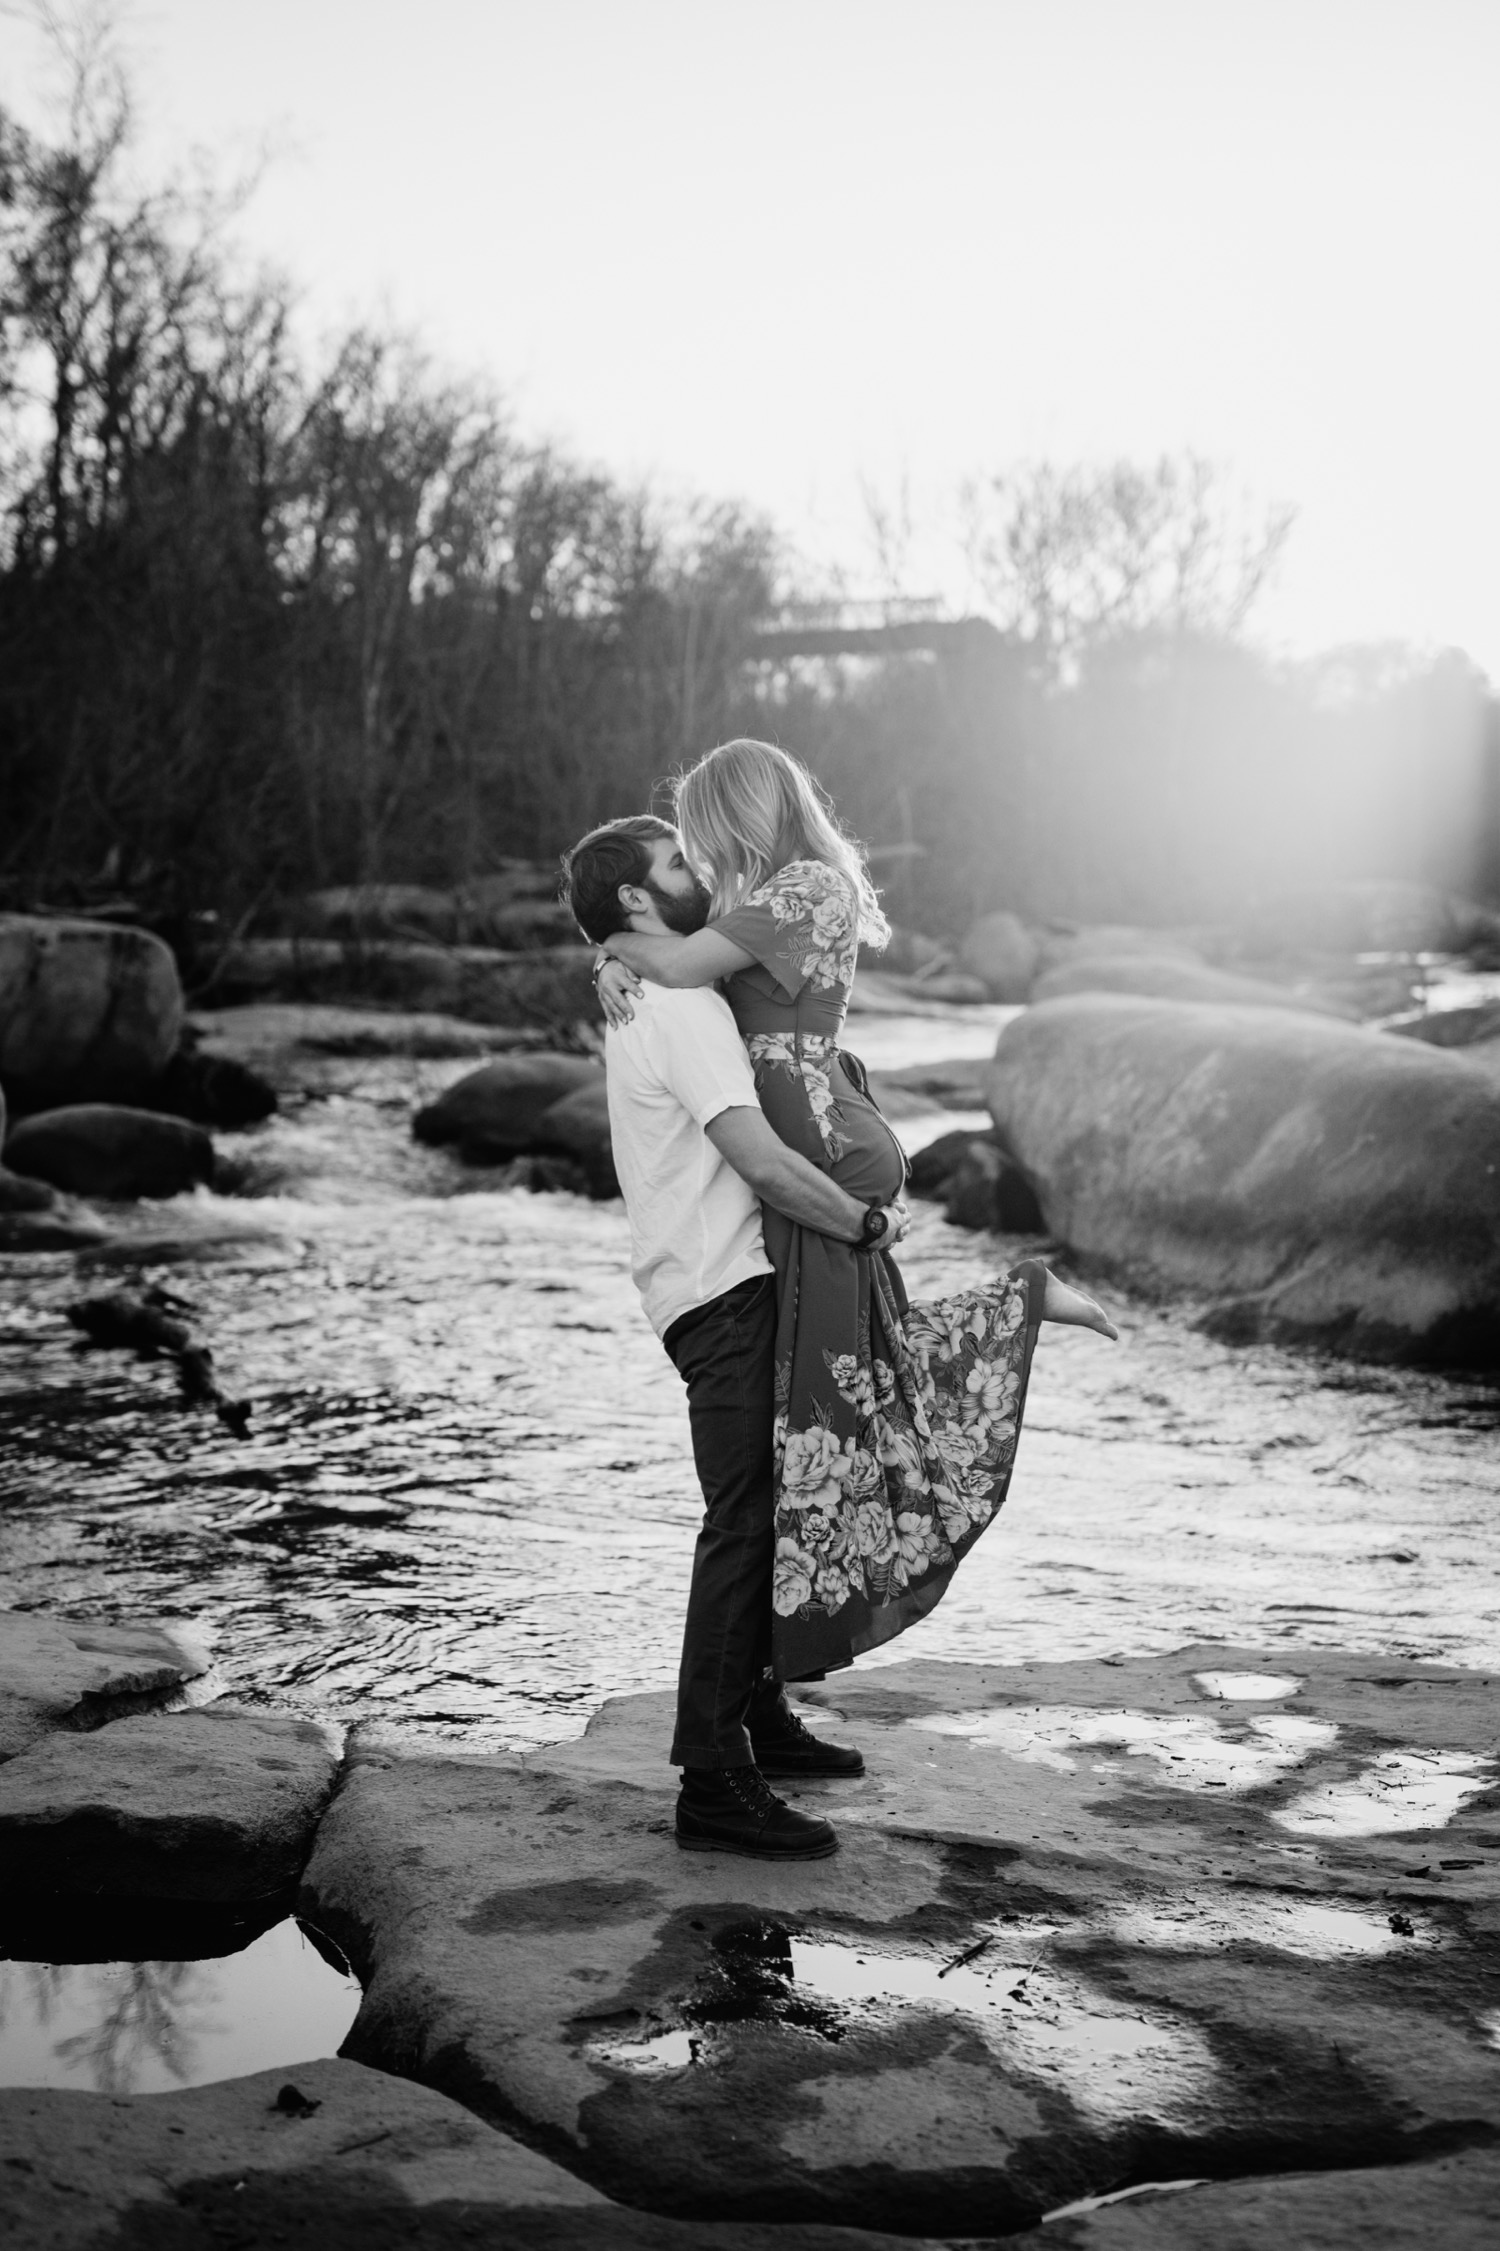 couple showcase love during engagement photoshoot in Belle Isle